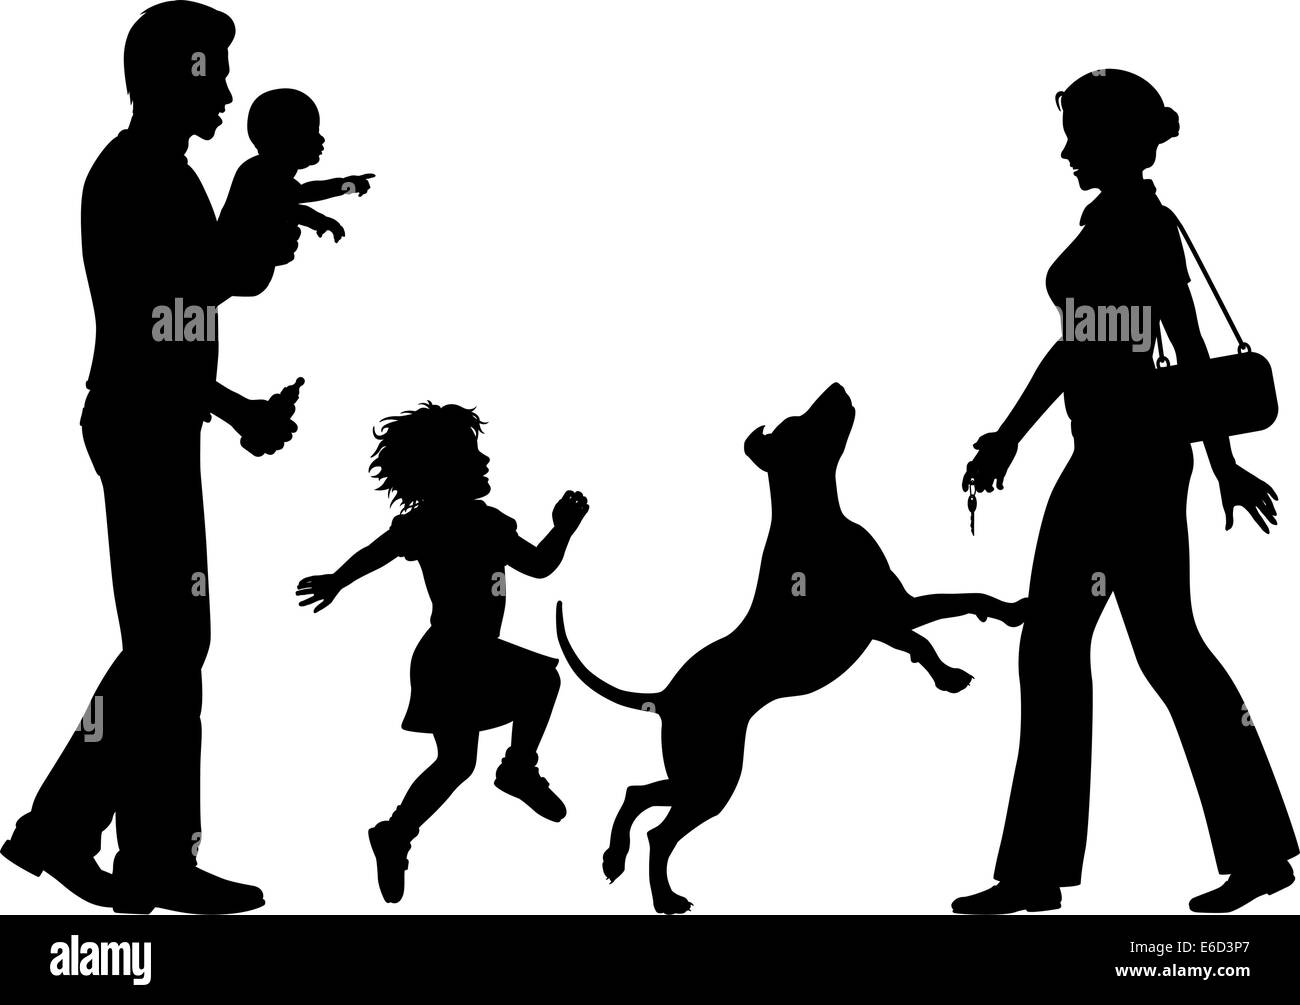 Editable vector silhouettes of a woman welcomed home by husband, children and dog with all figures as separate objects Stock Vector